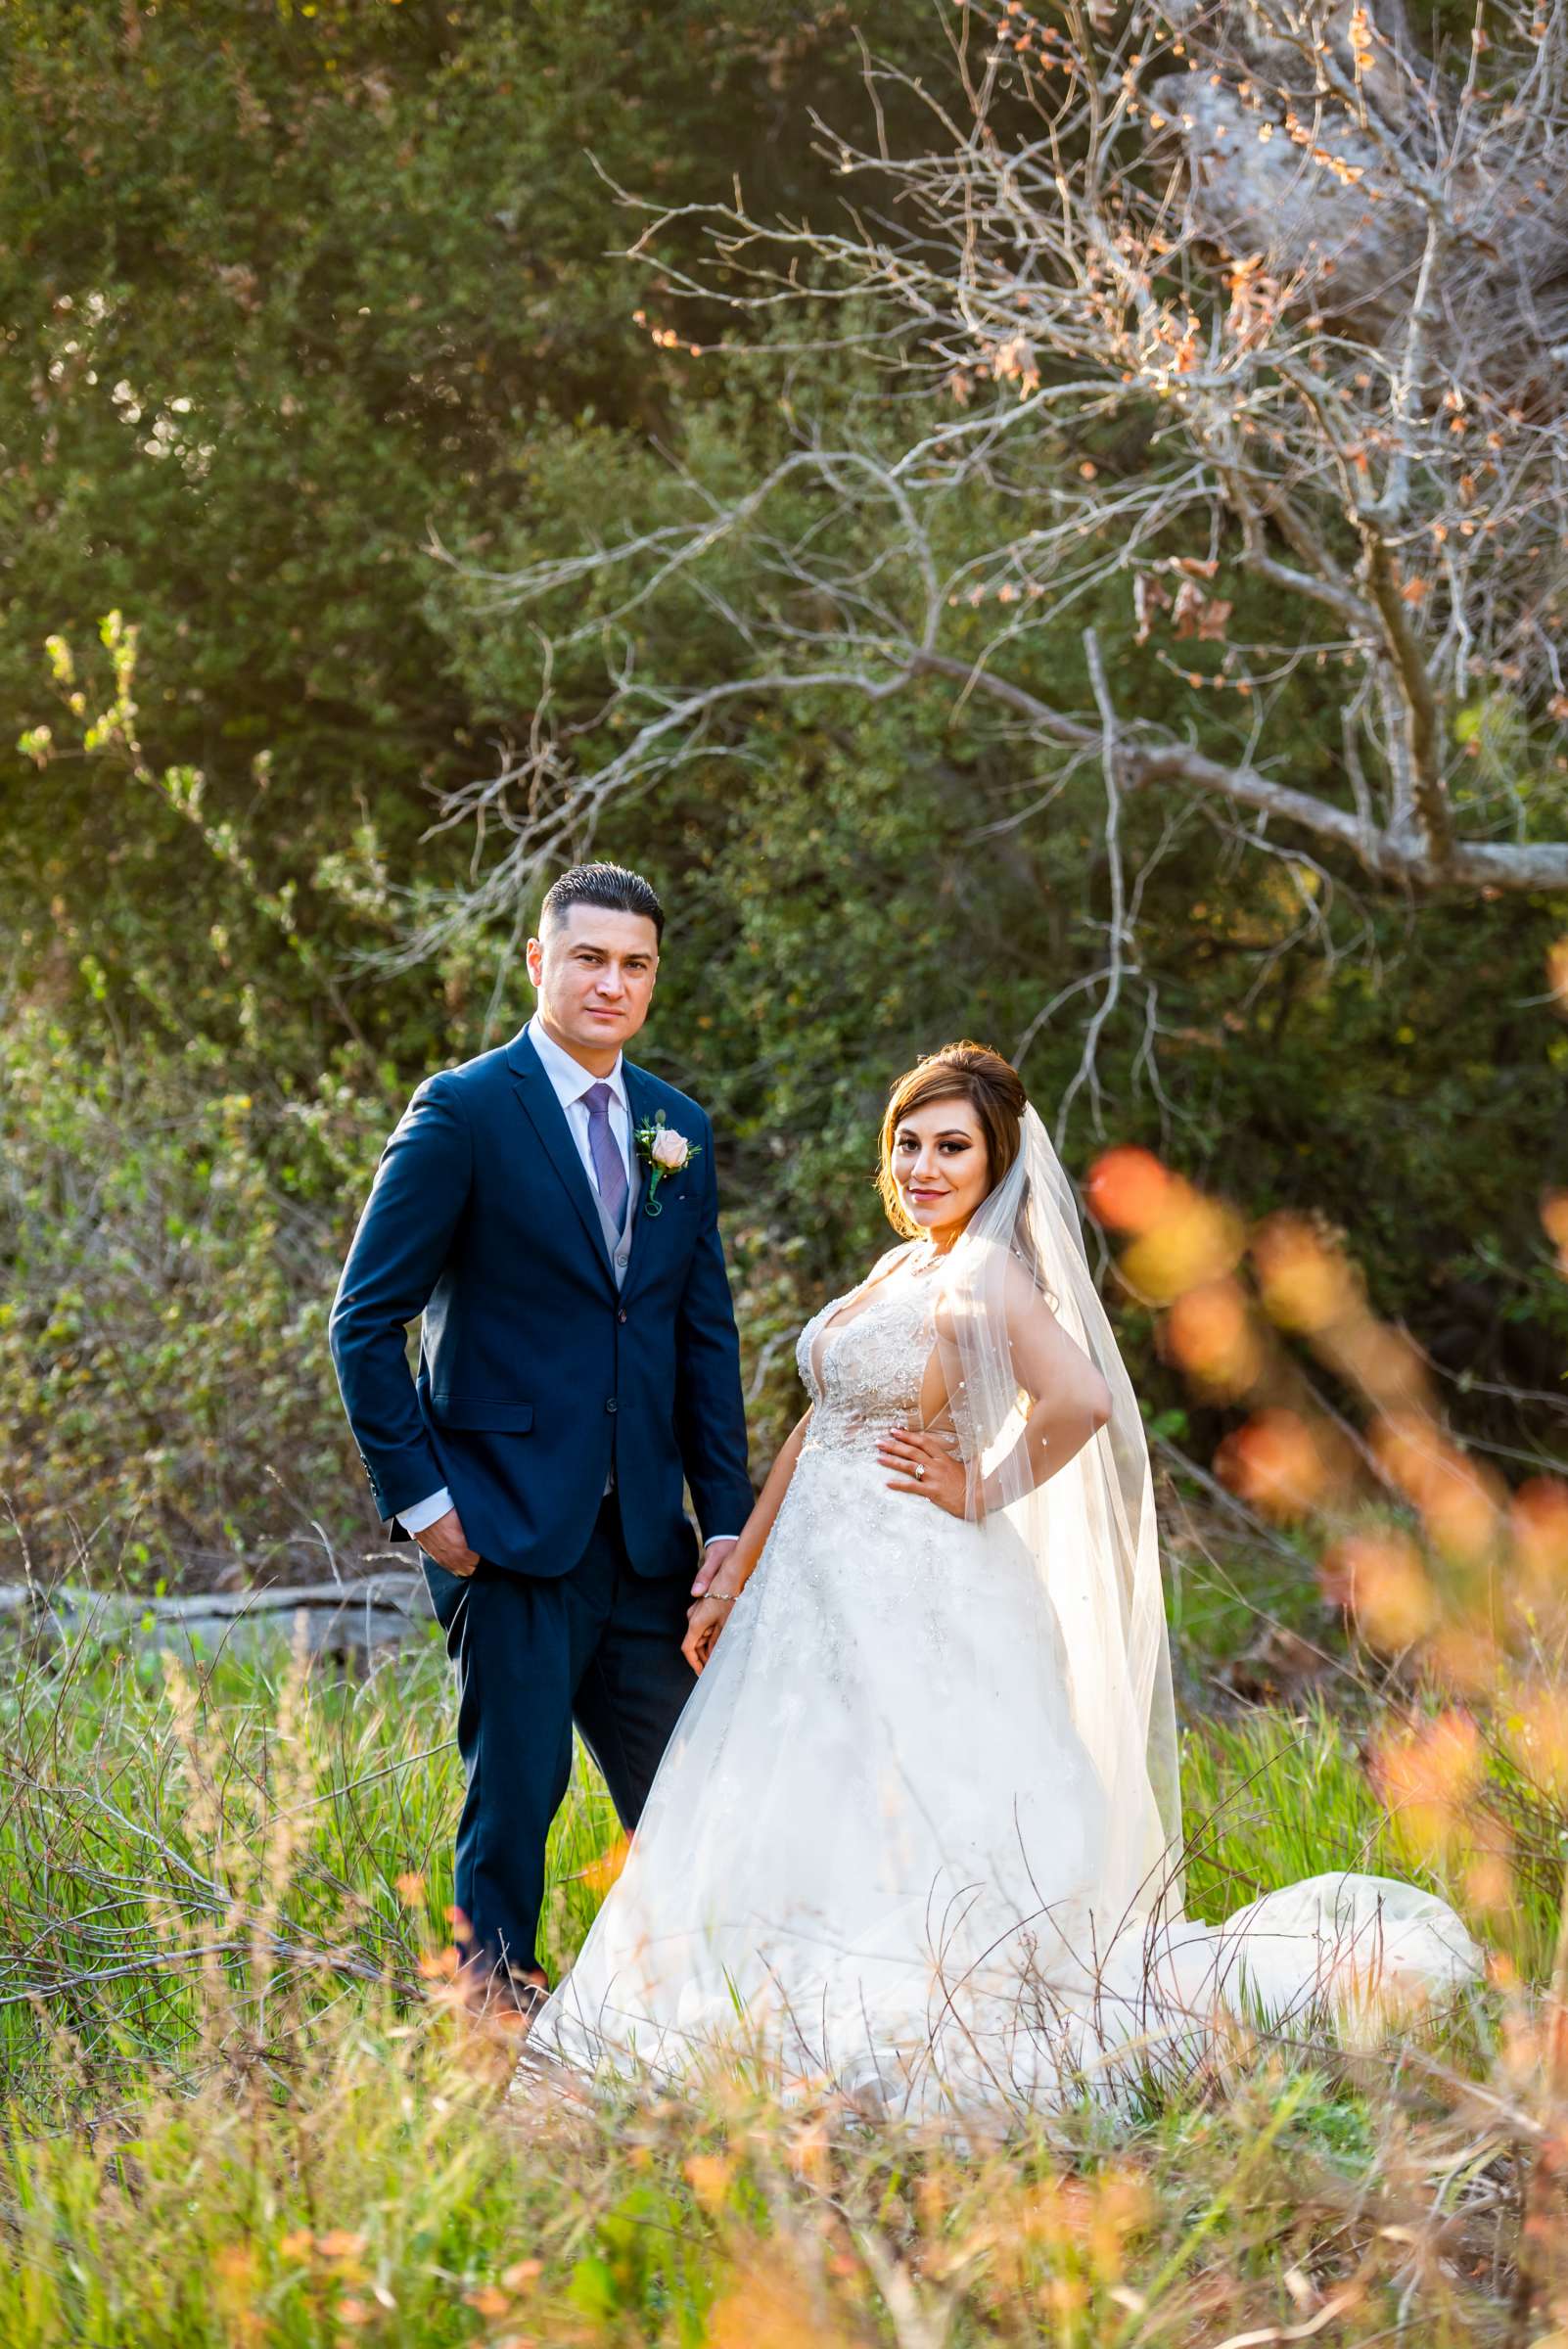 Cuvier Park-The Wedding Bowl Wedding, Ruby and Moises Wedding Photo #13 by True Photography